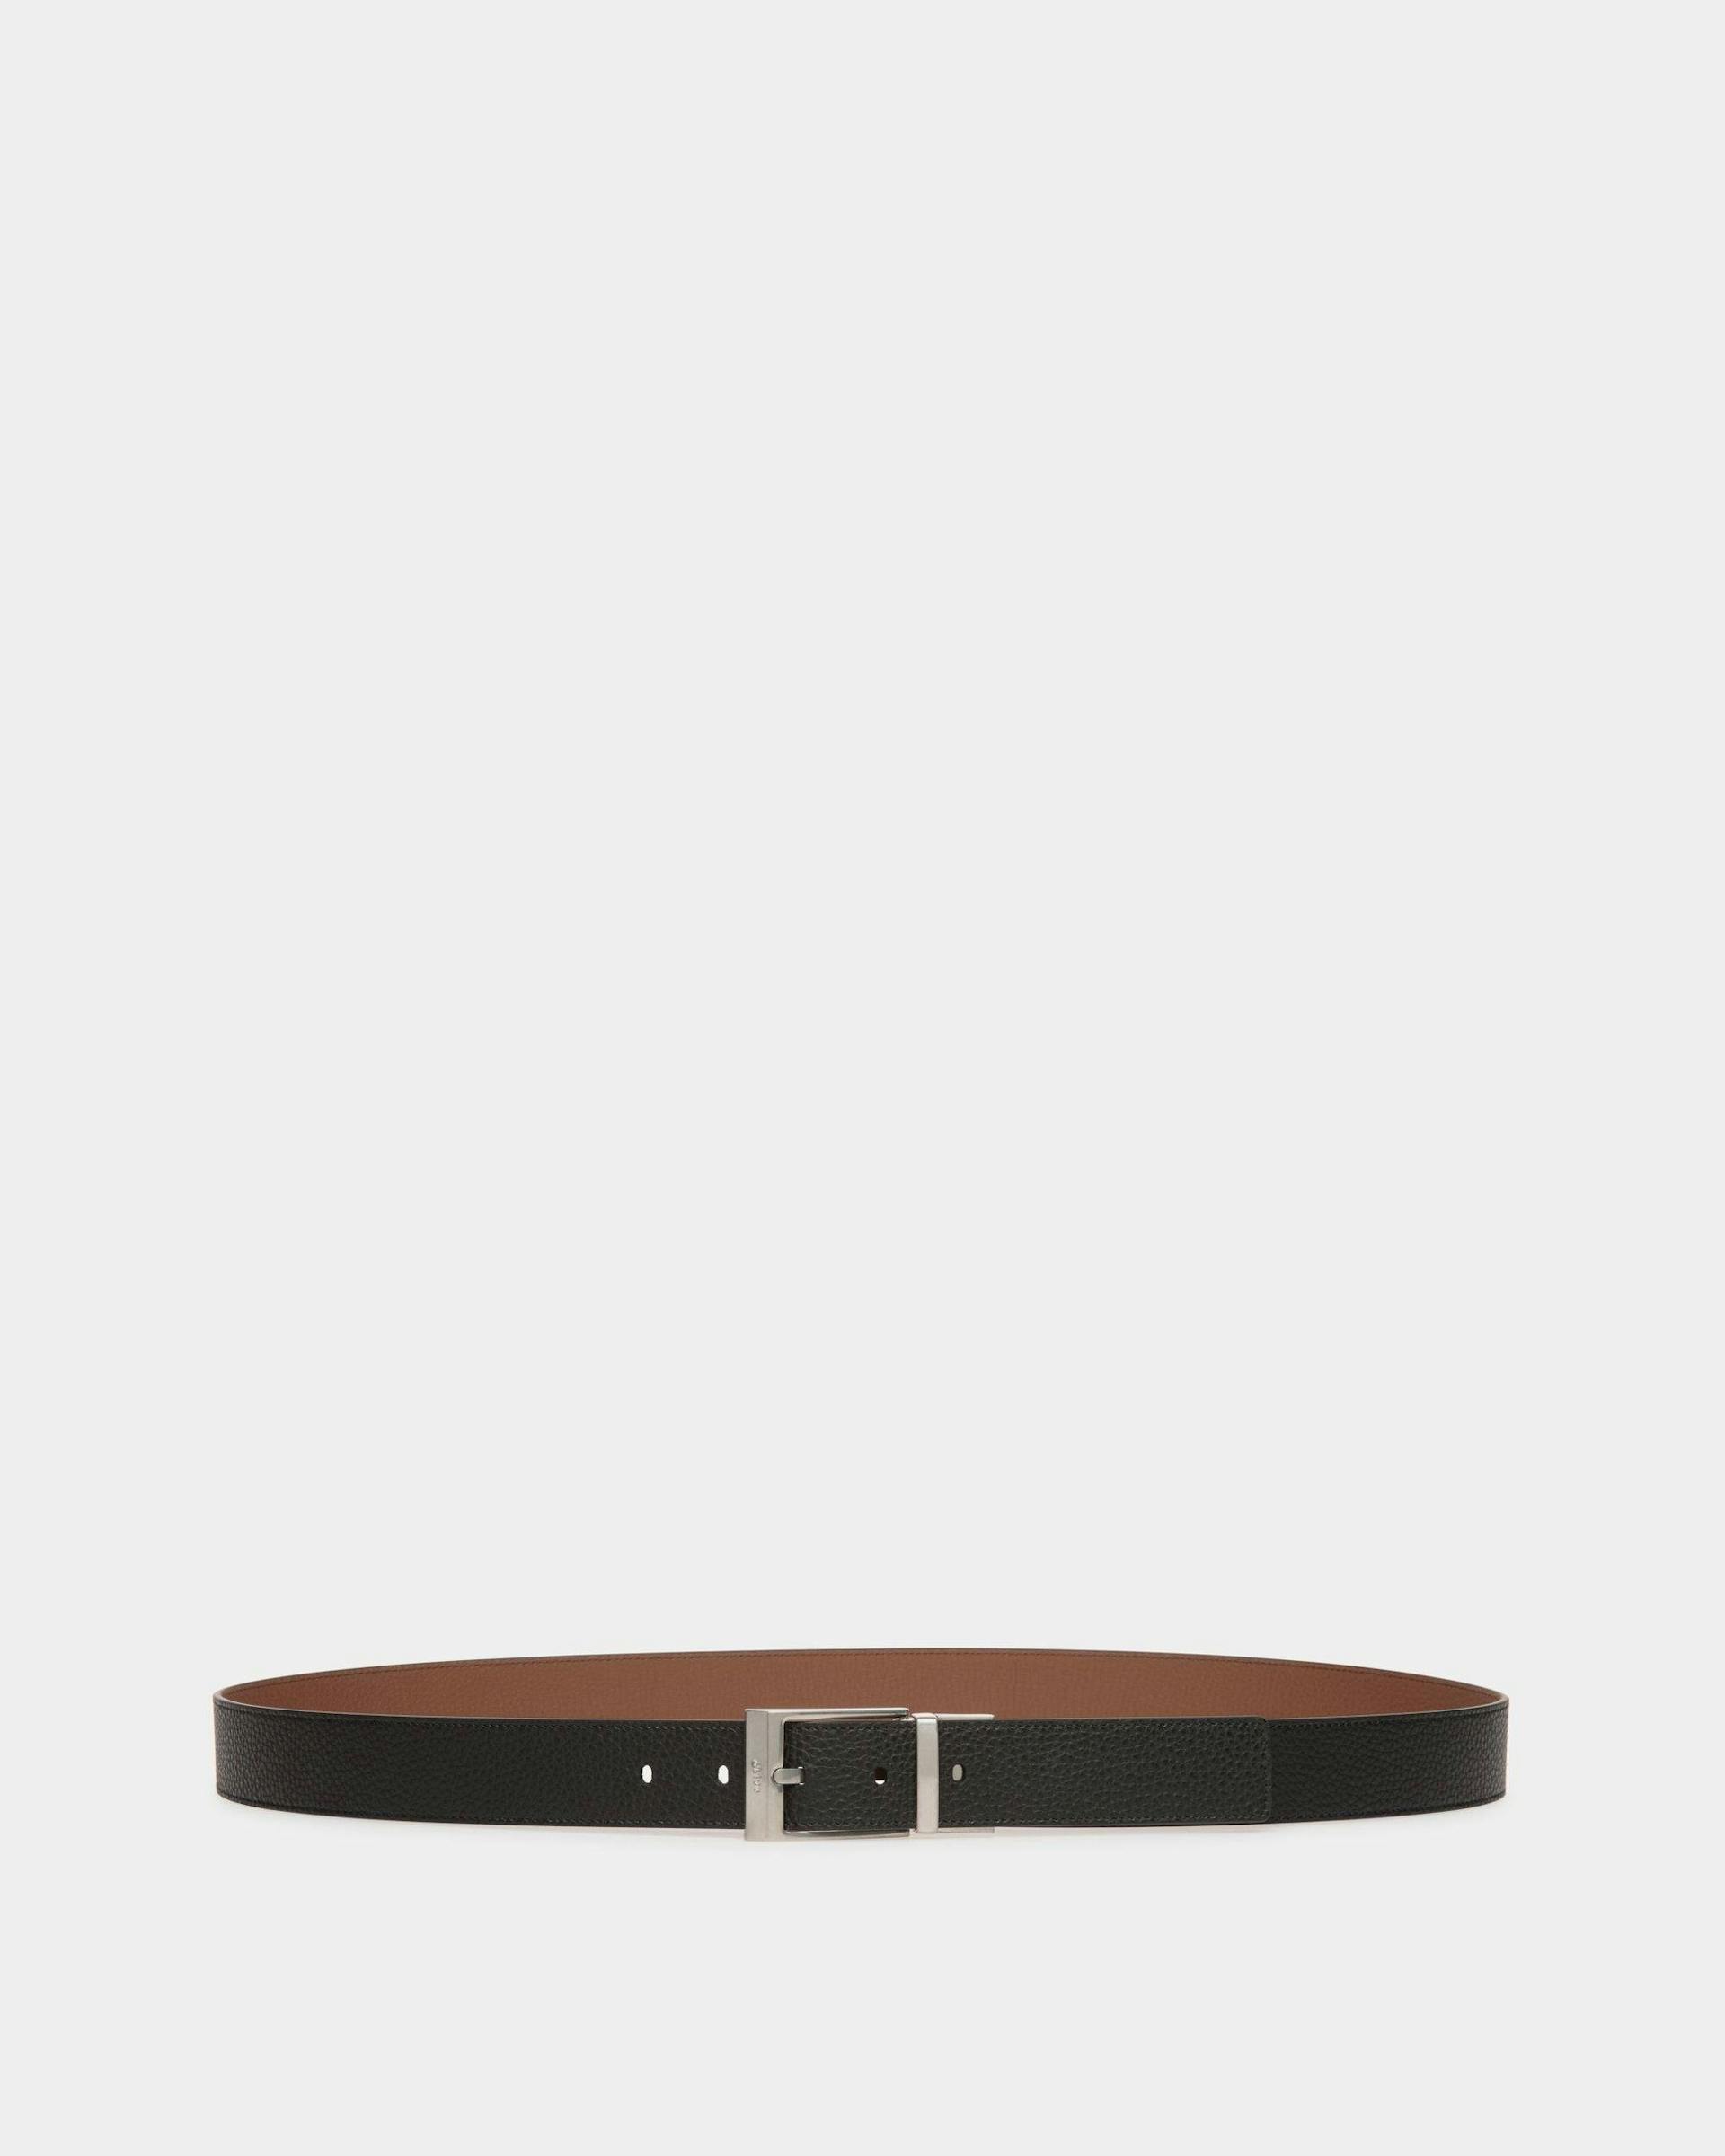 Men's Shiffie 35mm Reversible And Adjustable Belt in Black And Brown Leather | Bally | Still Life Front